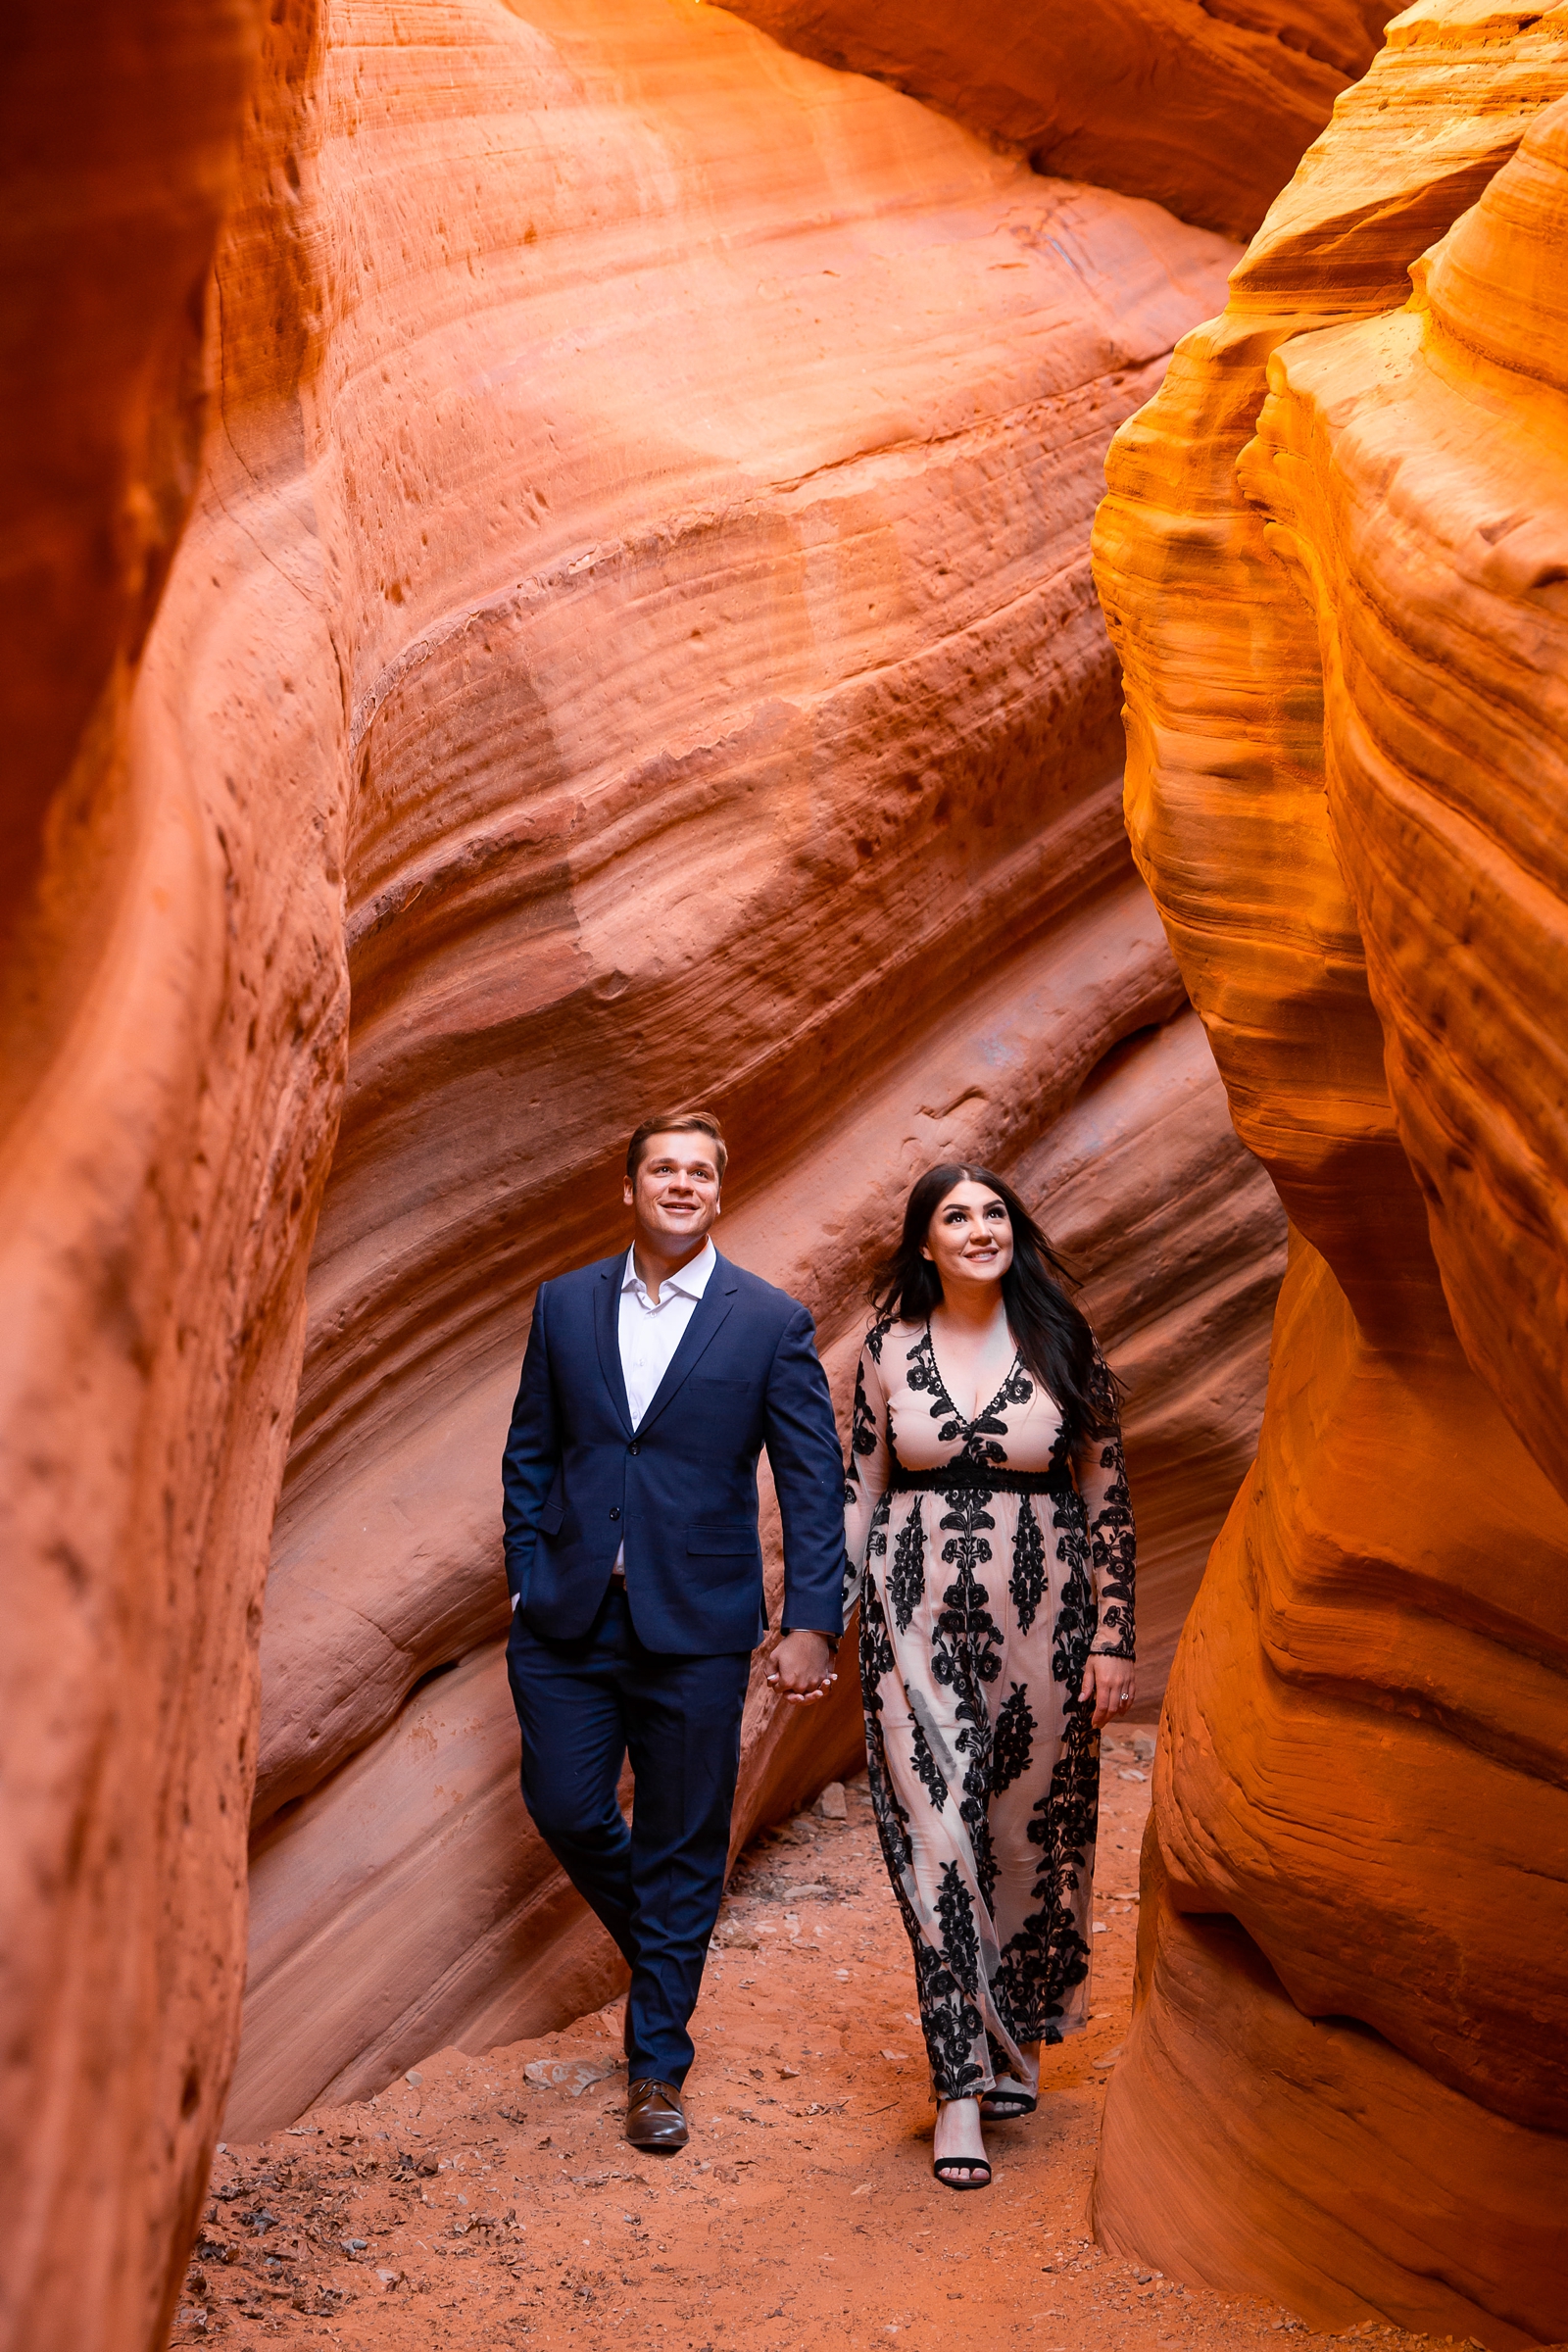 Engaged couple hiking in a Southern Utah slot canyon.